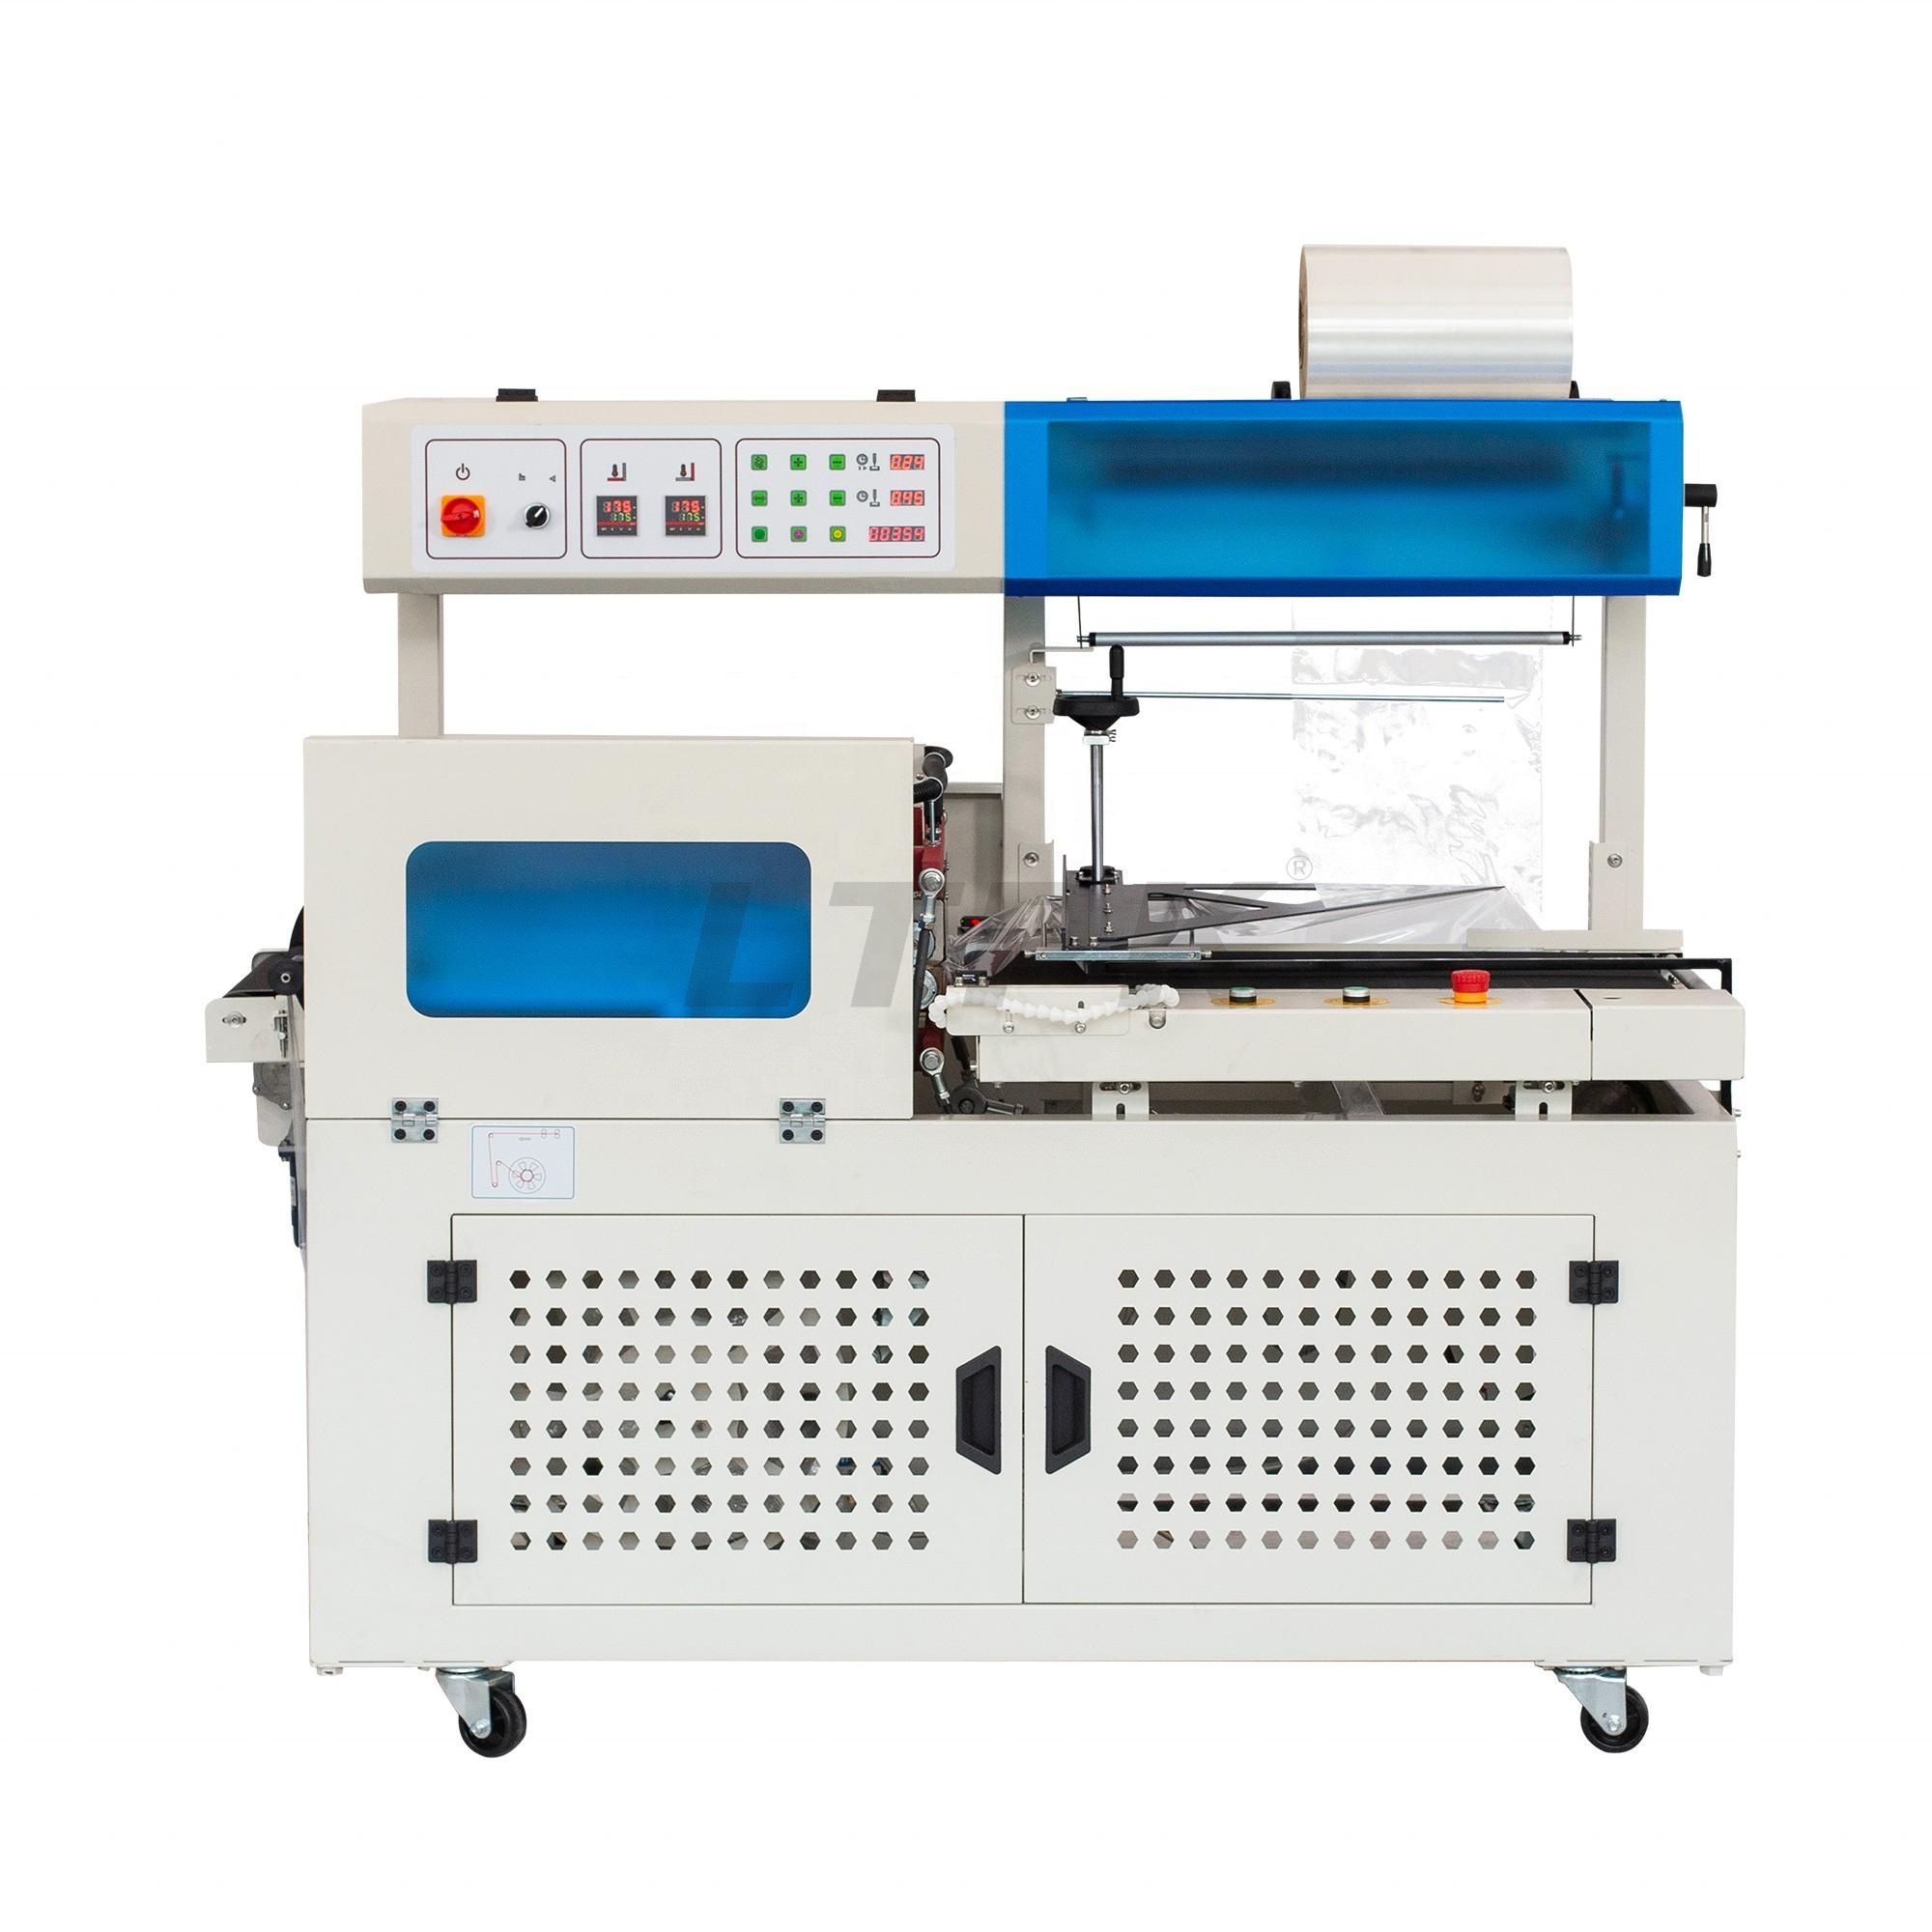  DQL5545D Automatic L-bar Sealer L type sealing packaging machine and DSB4522 Shrink Tunnel Packager